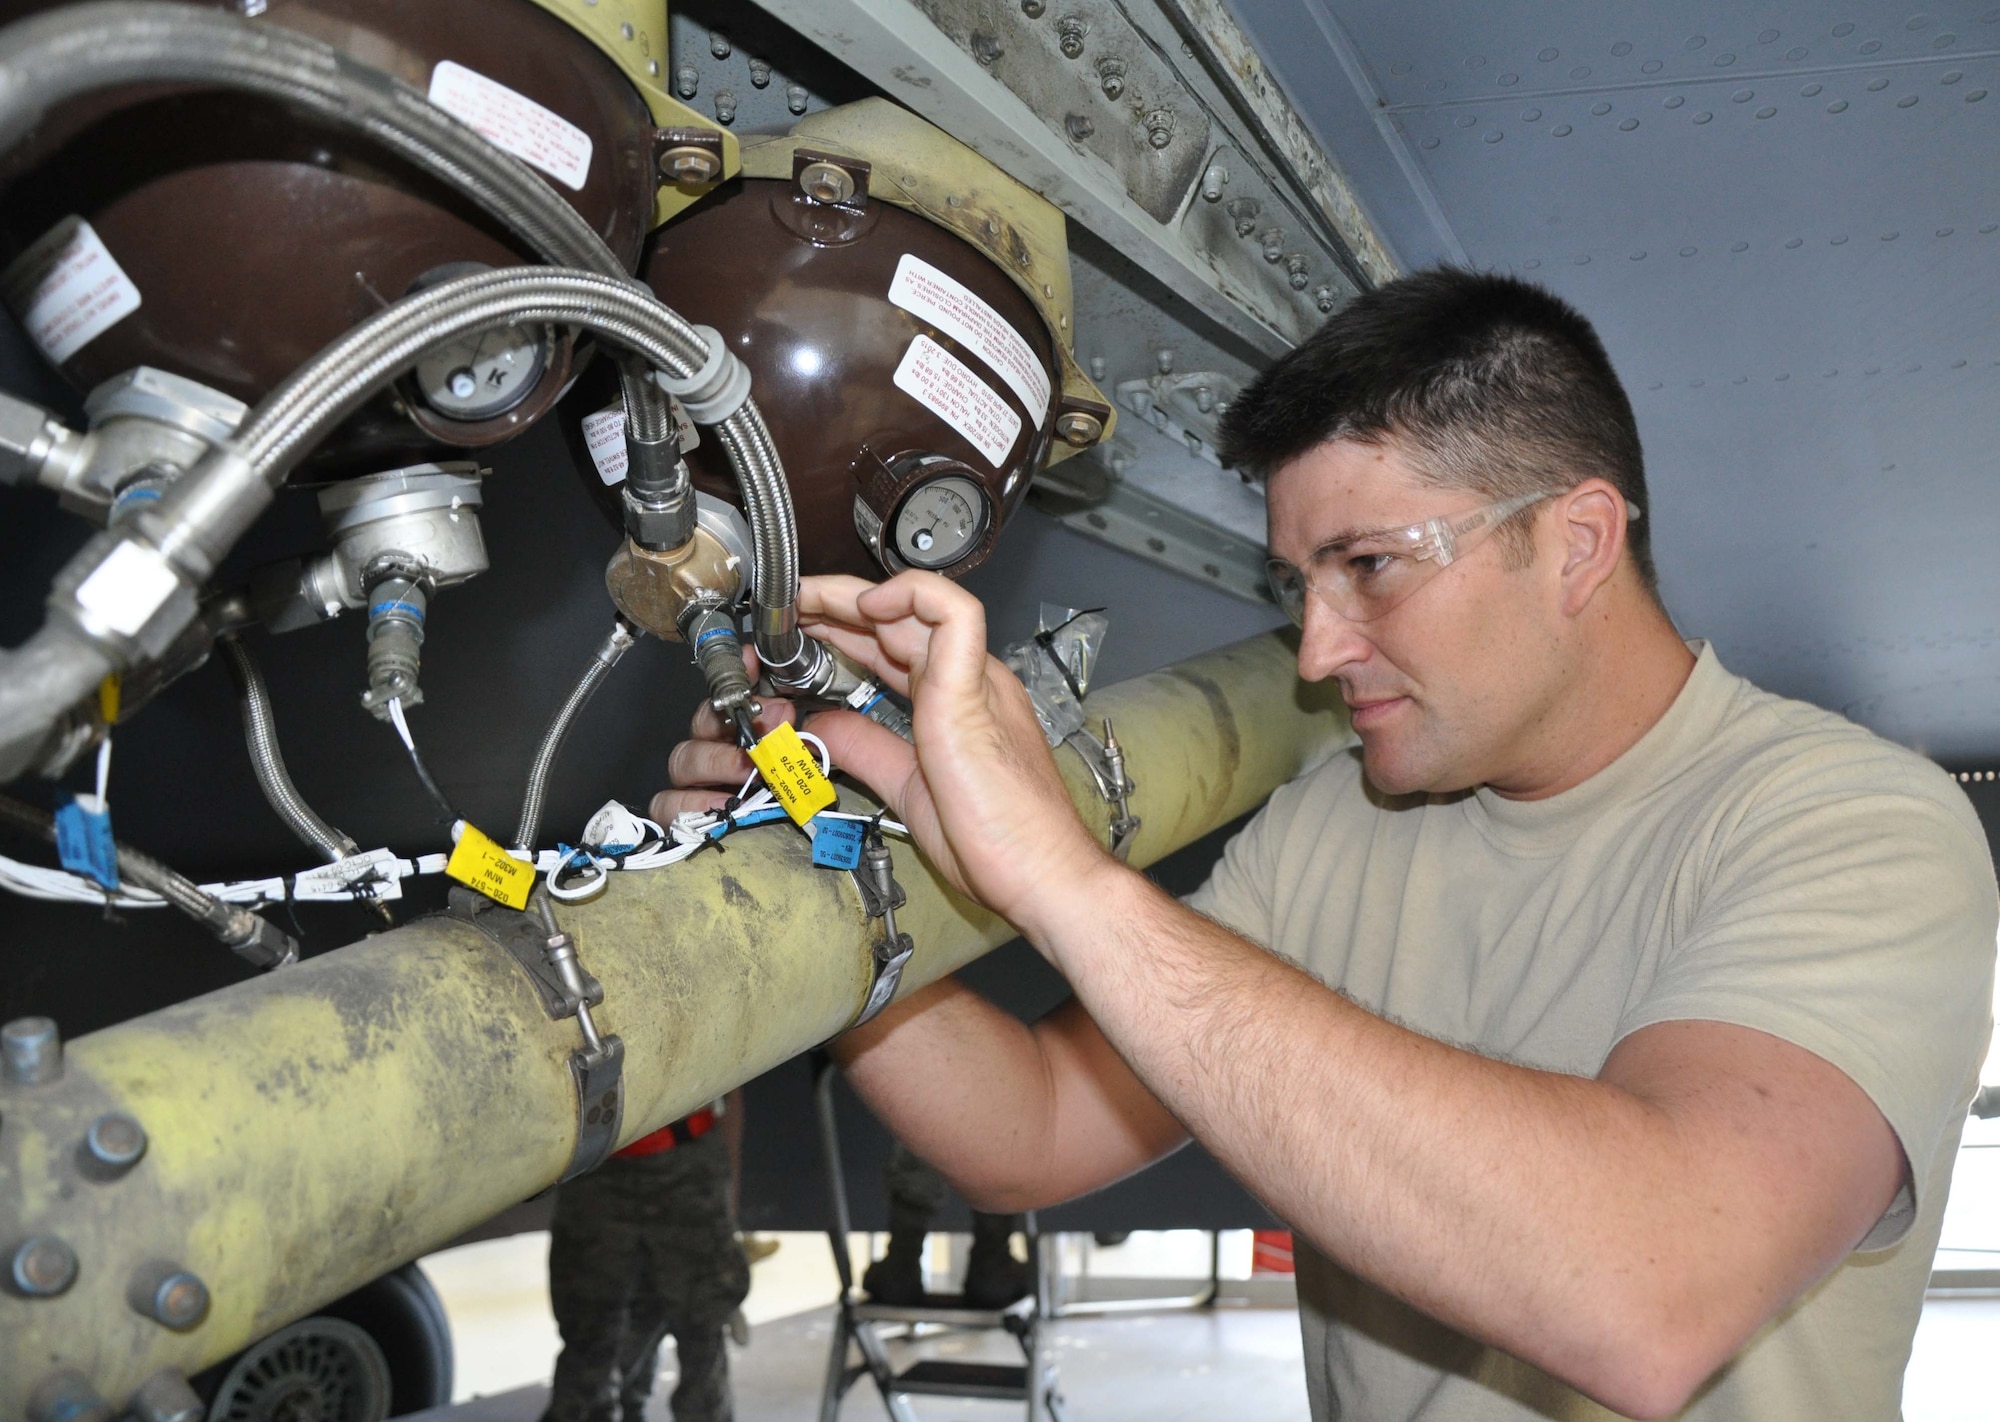 Tech. Sgt. Nick Klenke, electrical and environmental craftsman, 931st Maintenance Squadron inspects the wiring on the engine fire suppression system of a KC-135 Stratotanker during a phase inspection. (Air Force photo by Staff Sgt. Carrie Peasinger)